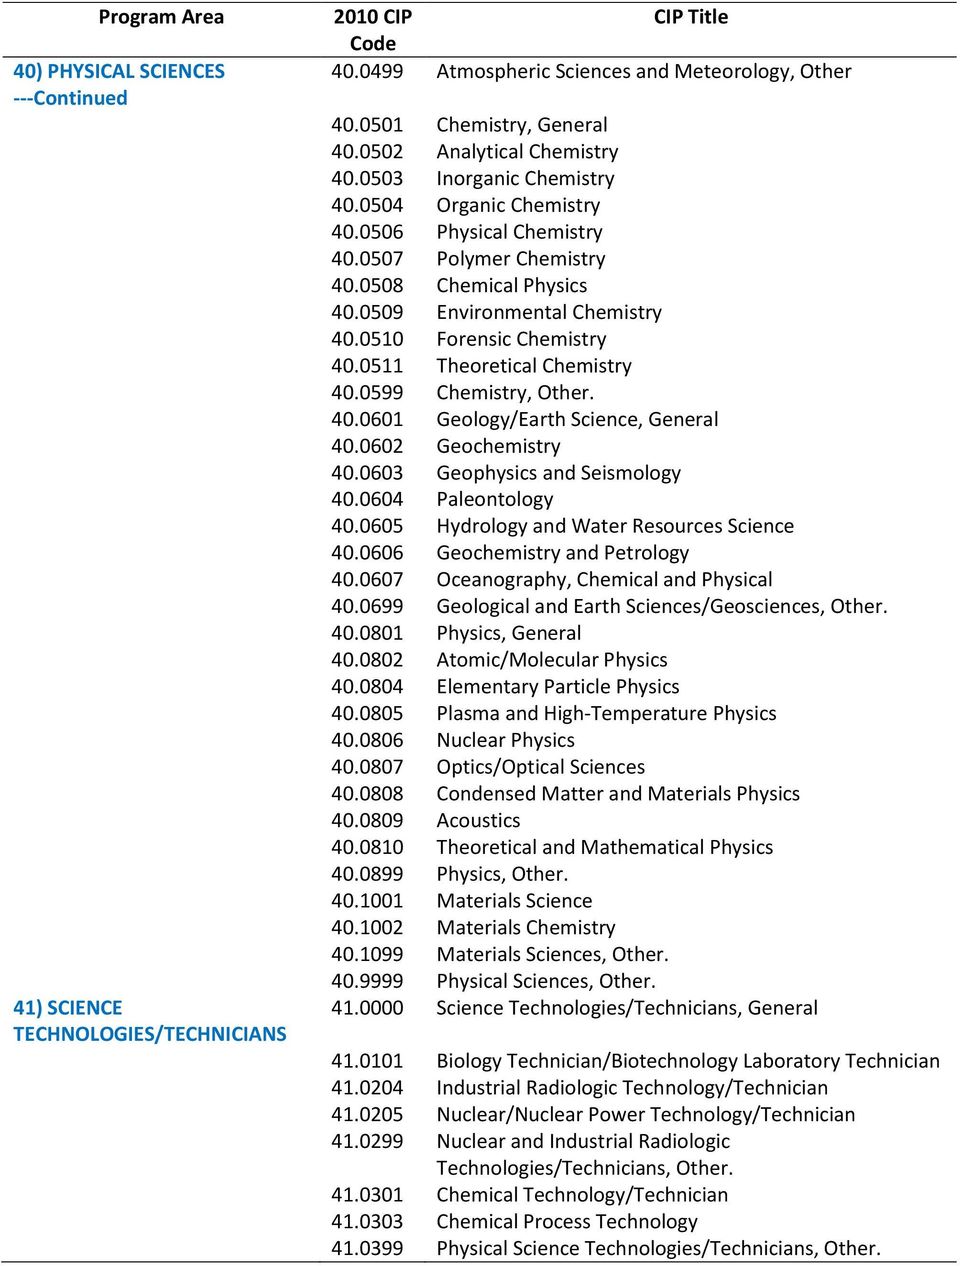 0599 Chemistry, Other. 40.0601 Geology/Earth Science, General 40.0602 Geochemistry 40.0603 Geophysics and Seismology 40.0604 Paleontology 40.0605 Hydrology and Water Resources Science 40.